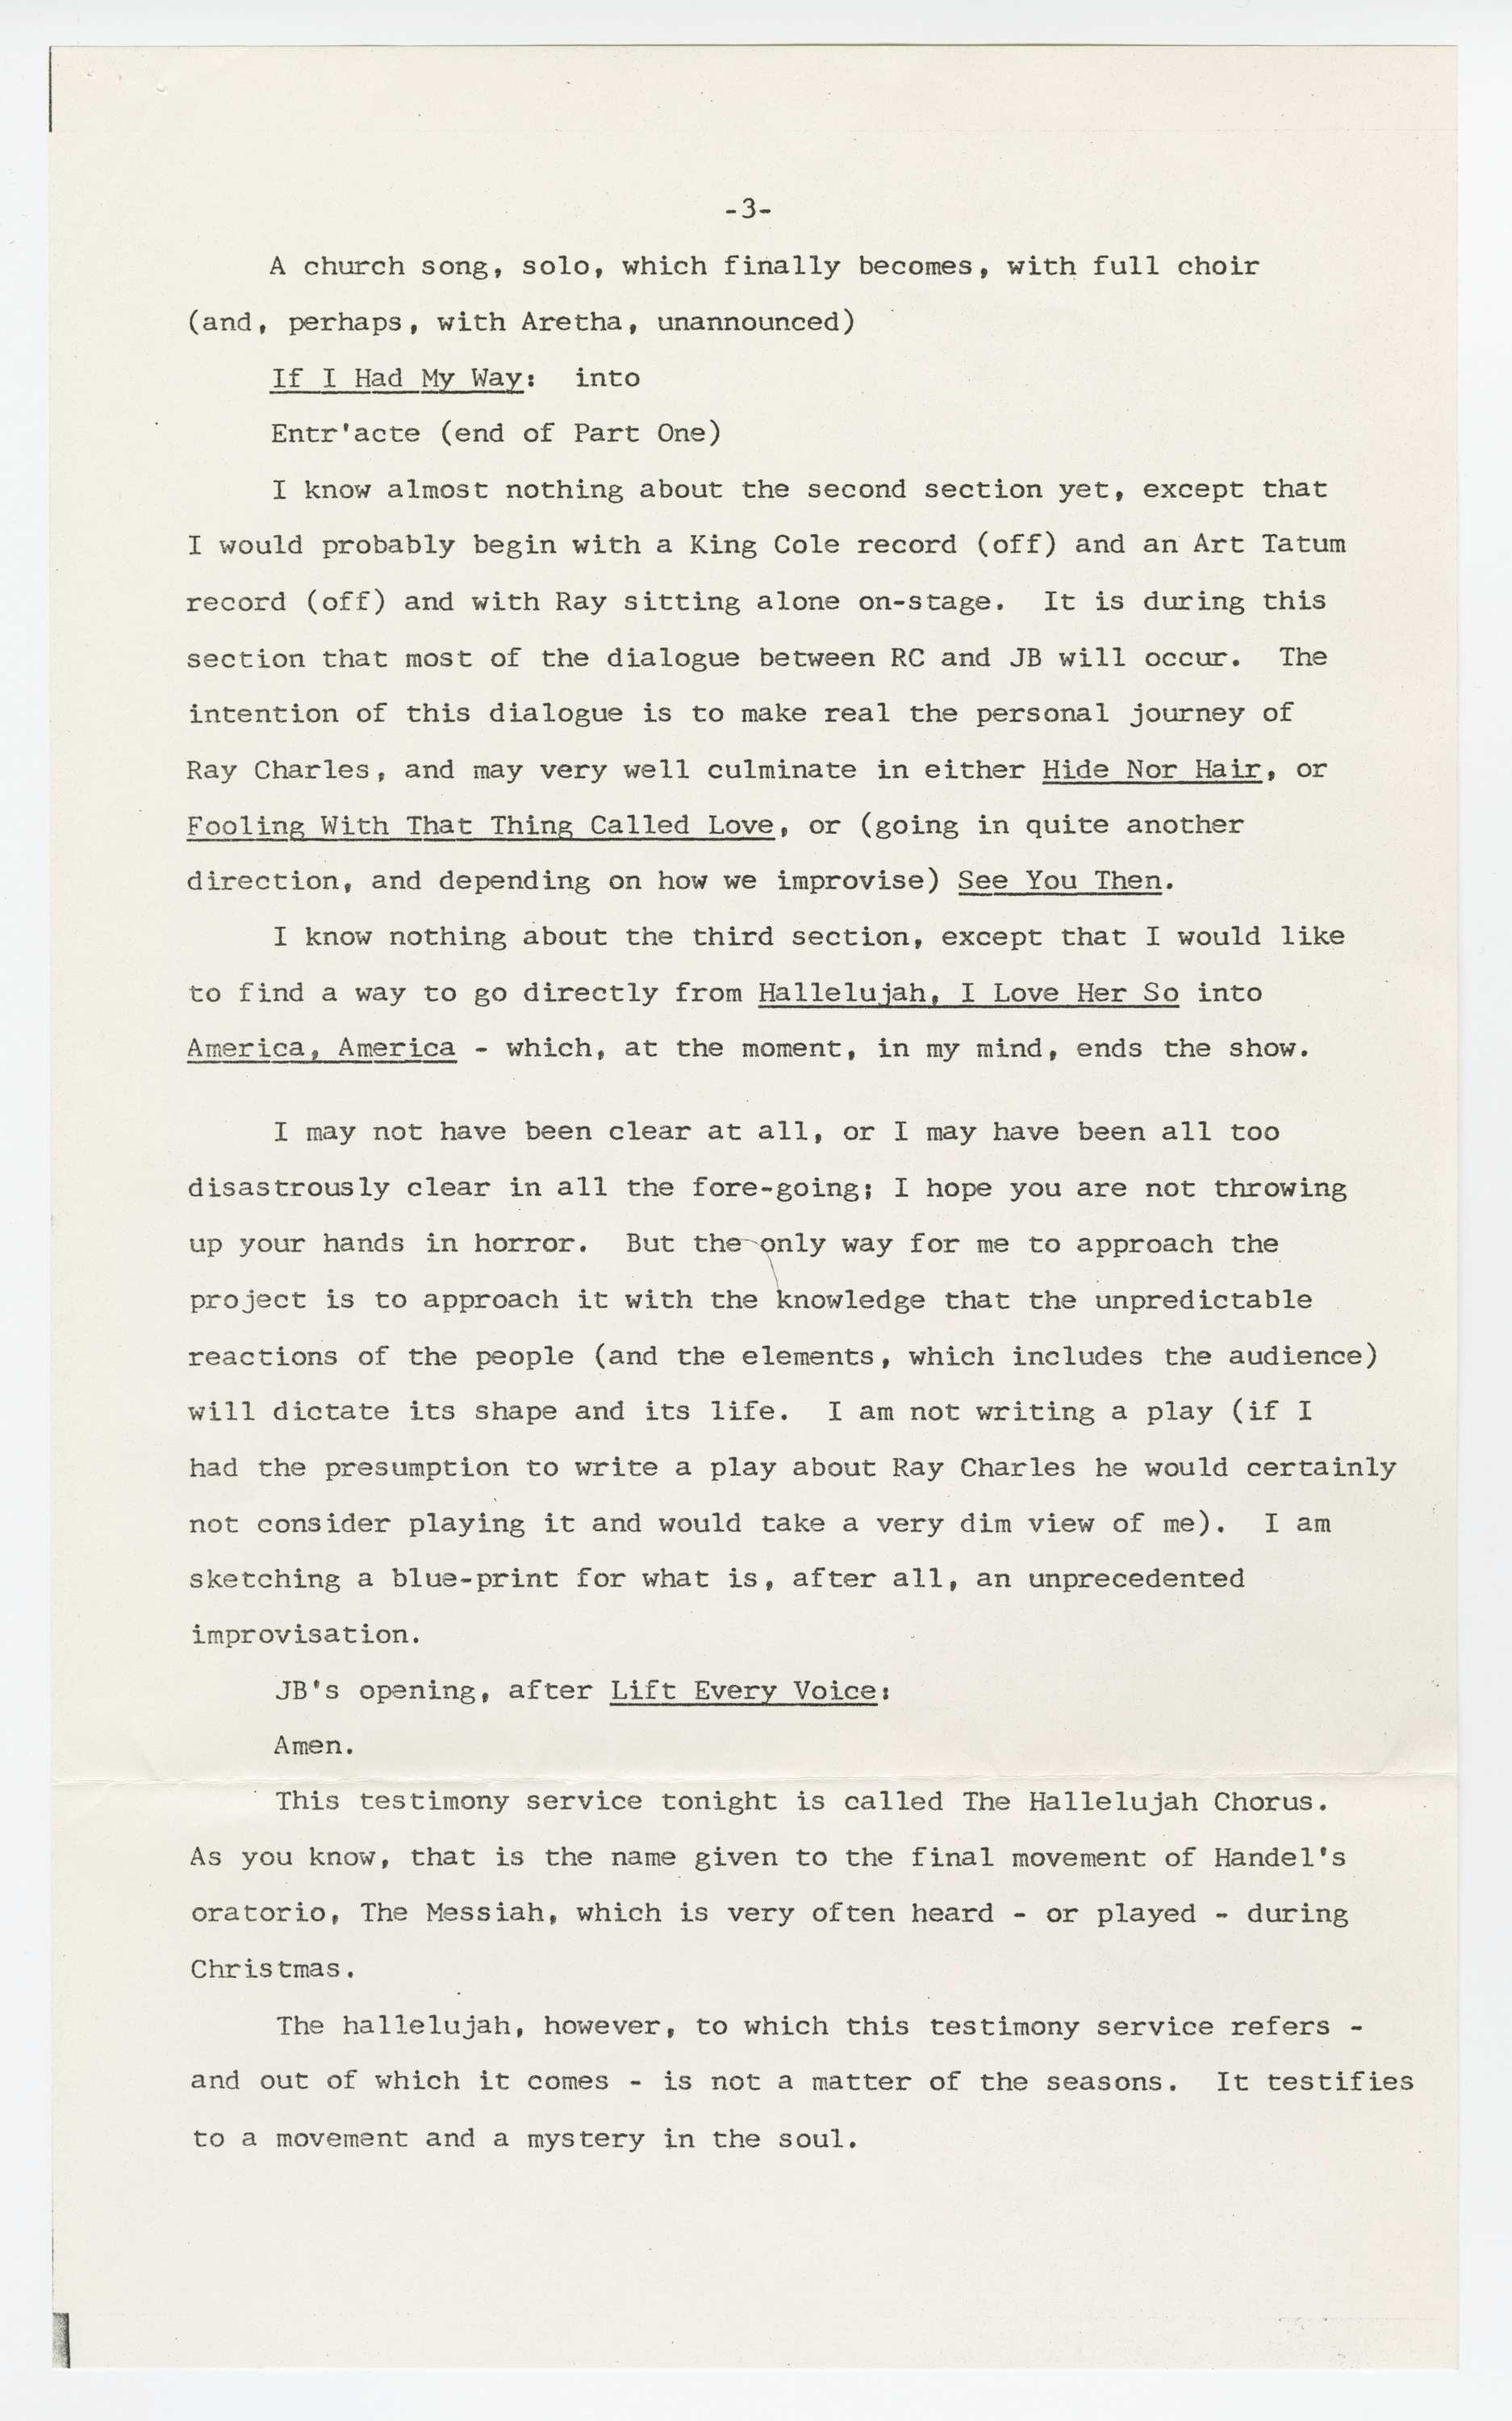 Image of a page of James Baldwin's Hallelujah Chorus. The text is typed in black ink on white paper.